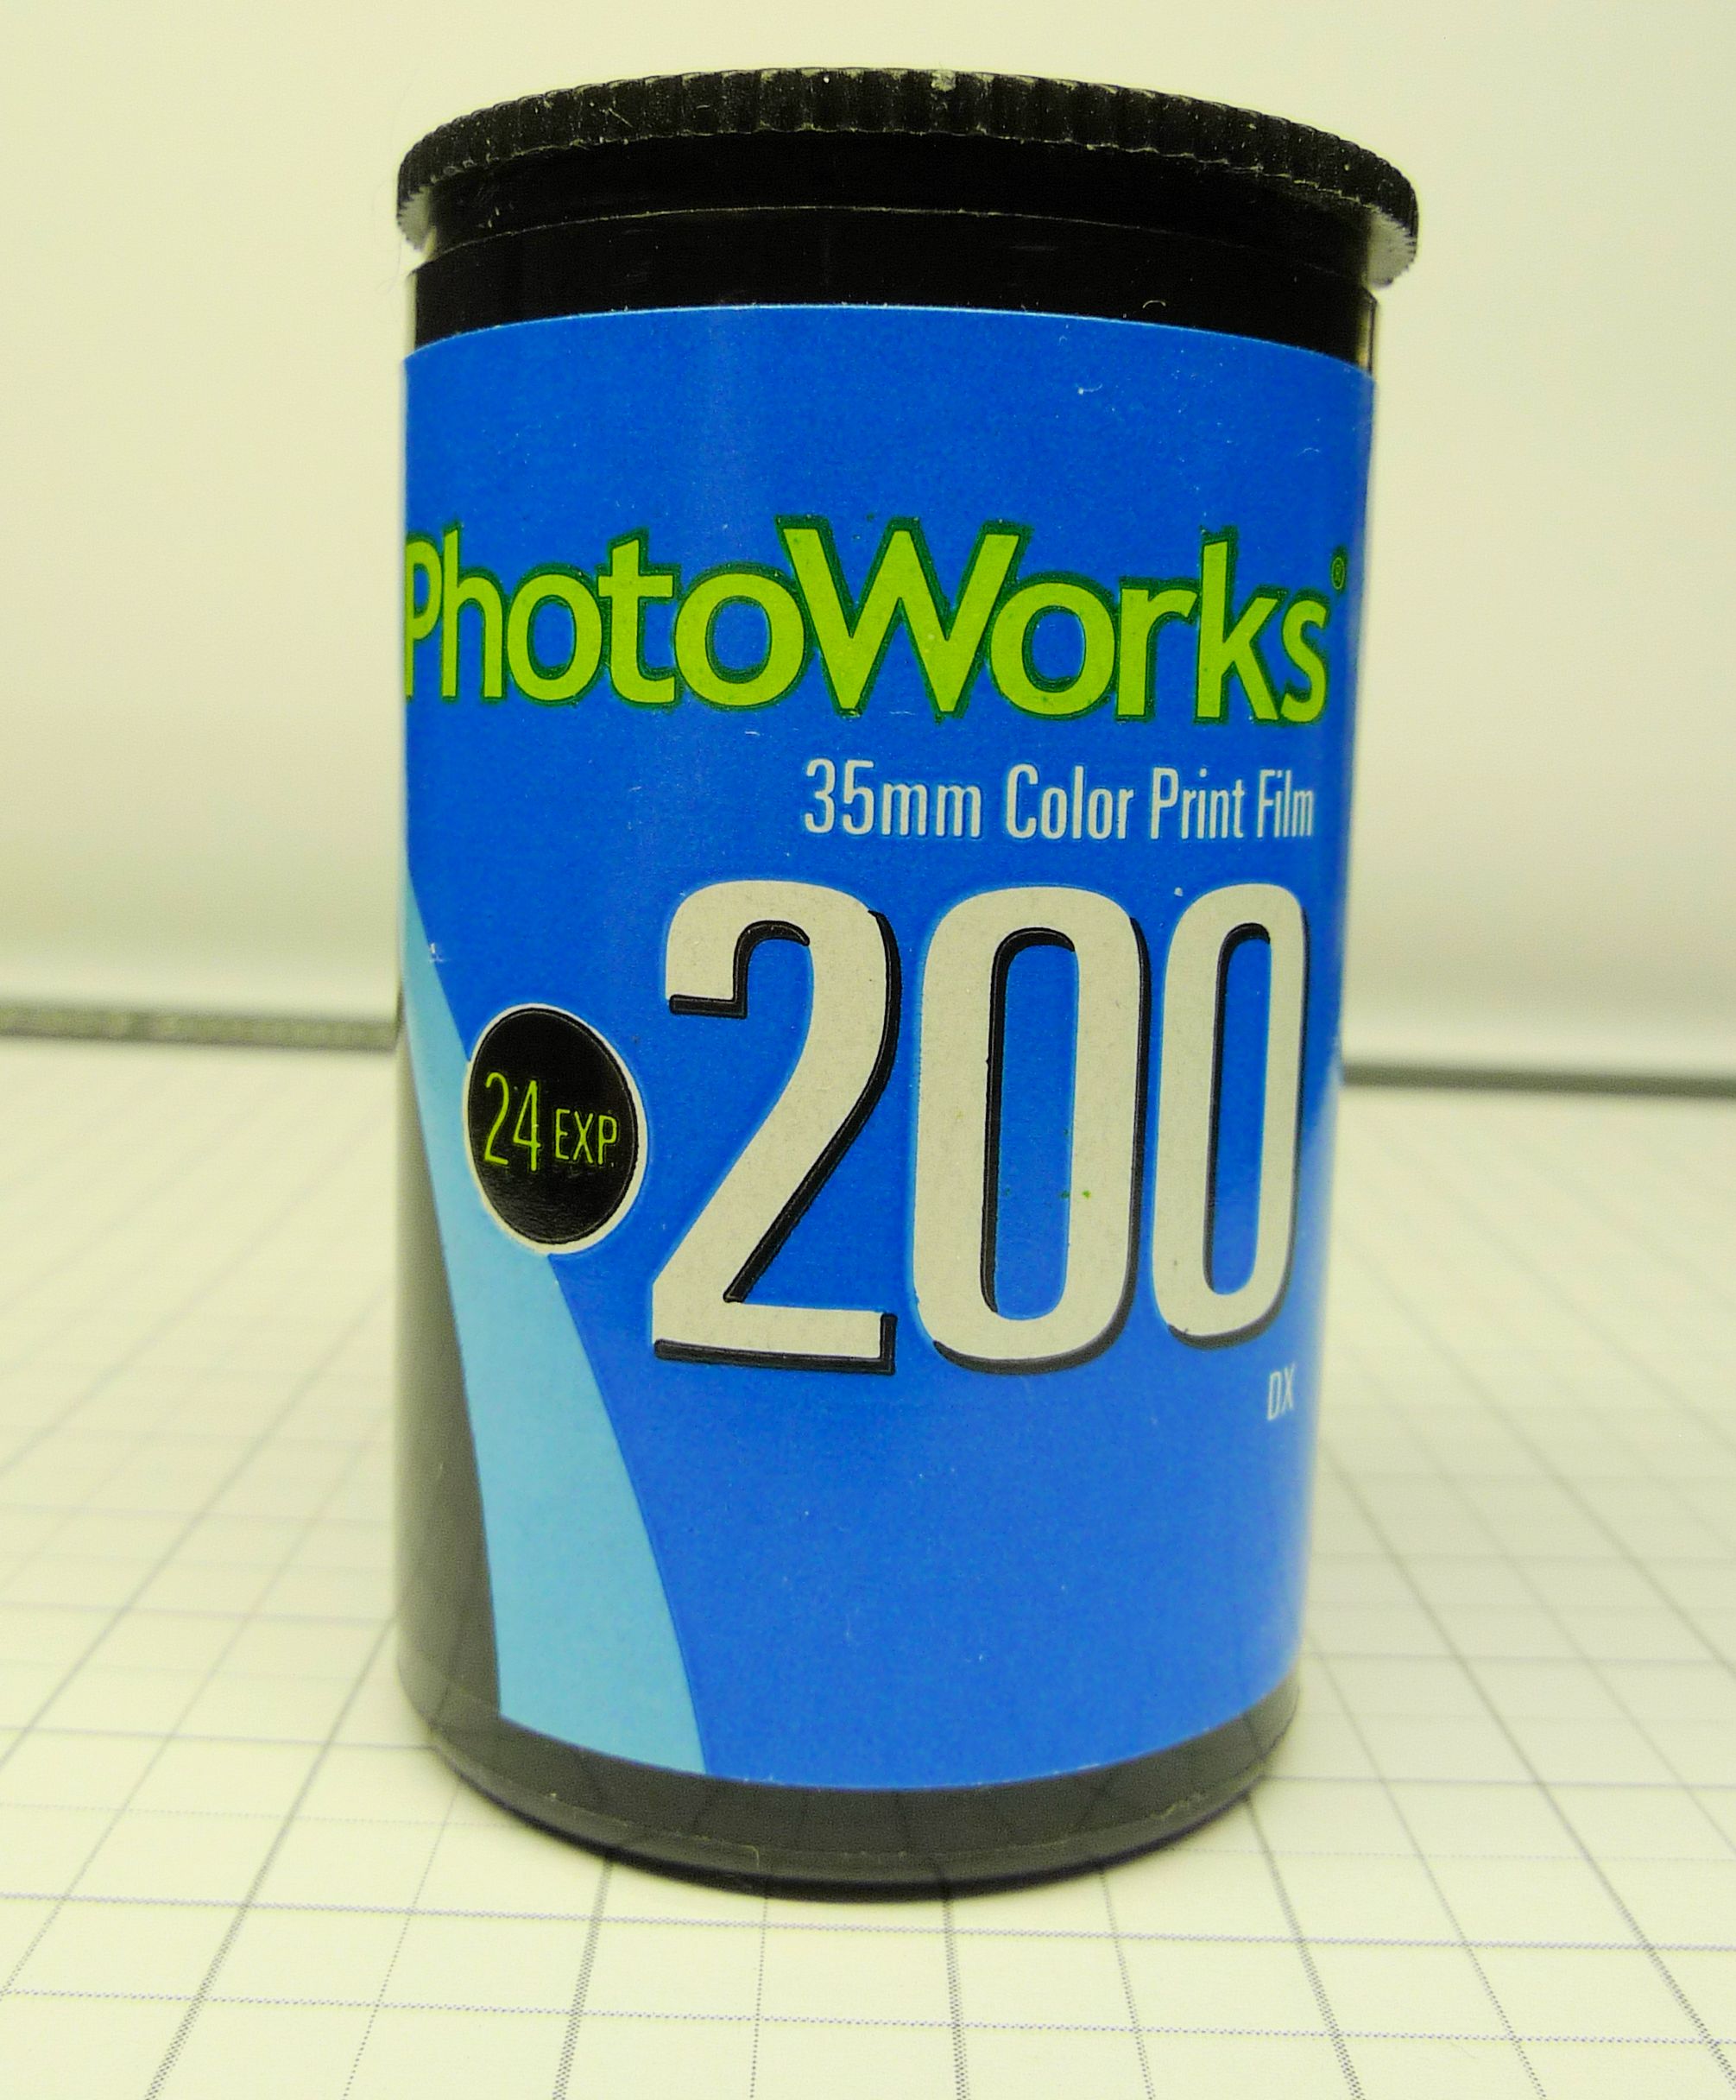 Photoworks 200 Color Print Film 1 Roll 24 Exp Expired 8/2005 Untested VS28 